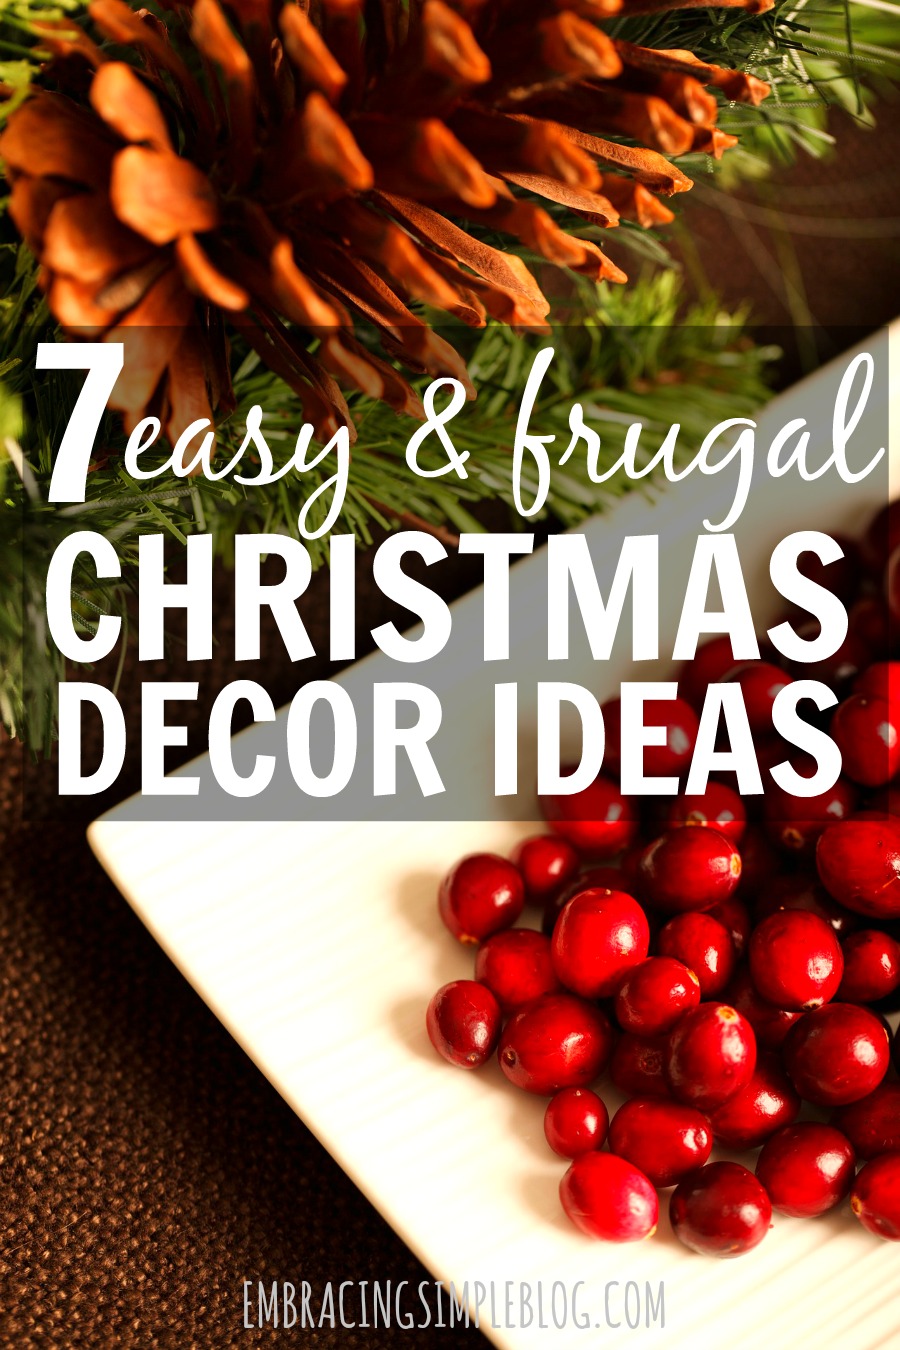 Easy and inexpensive Christmas decor ideas to give you some inspiration for simple ways you can decorate your own home this holiday season!